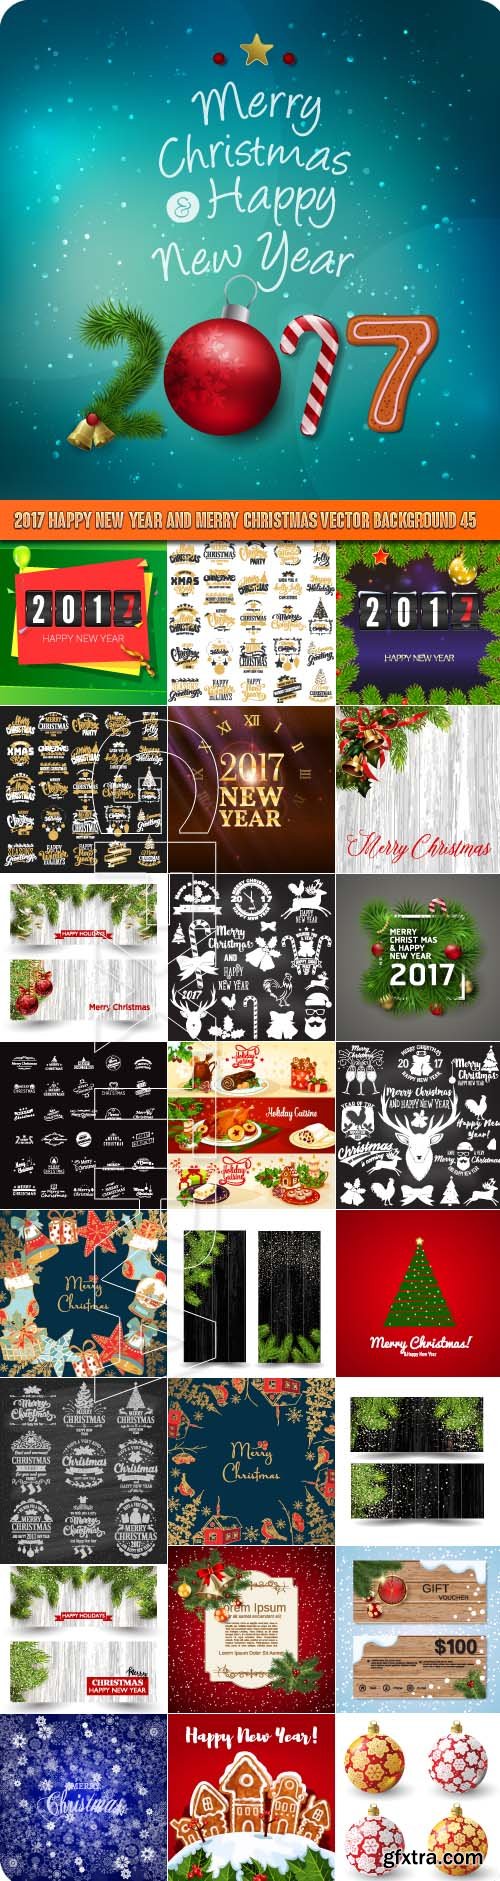 2017 Happy New Year and Merry Christmas vector background 45